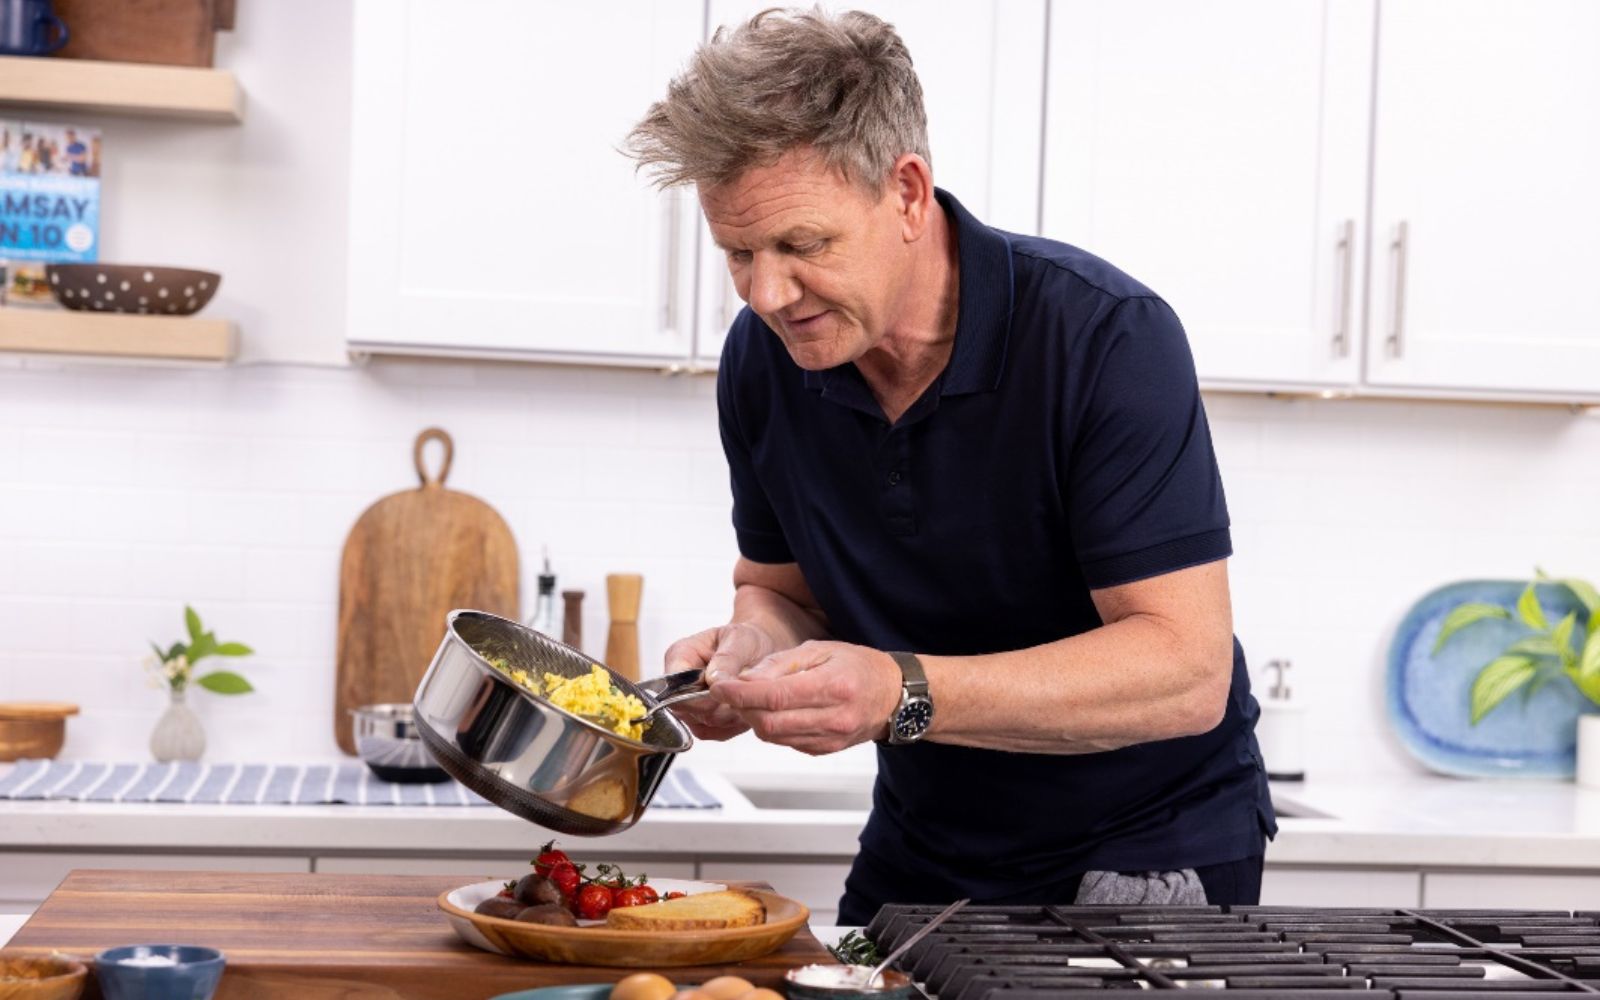 Gordon Ramsay HexClad: What Does Michelin Star Chef Use at Home?